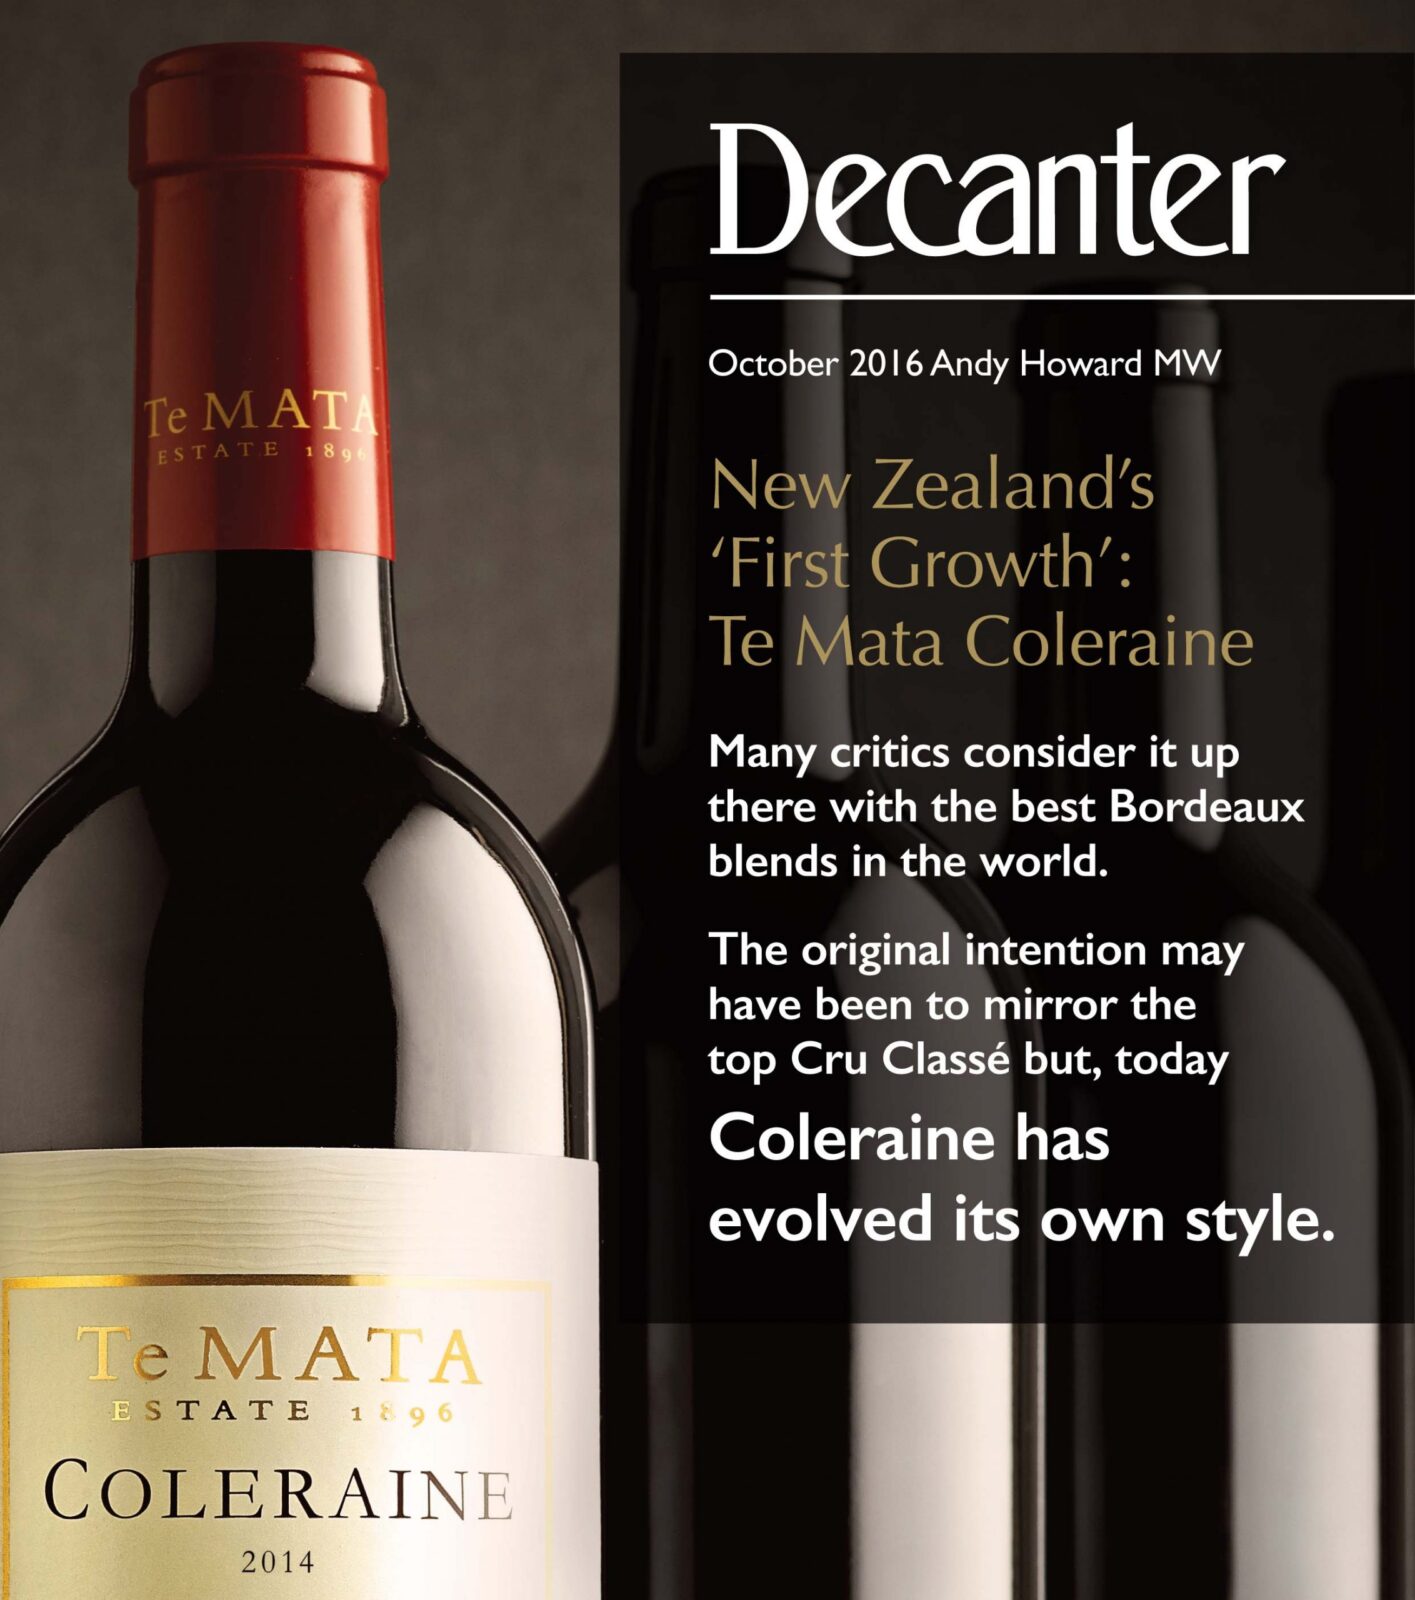 ‘New Zealand’s First Growth’ – Decanter’s Andy Howard MW on Te Mata Coleraine